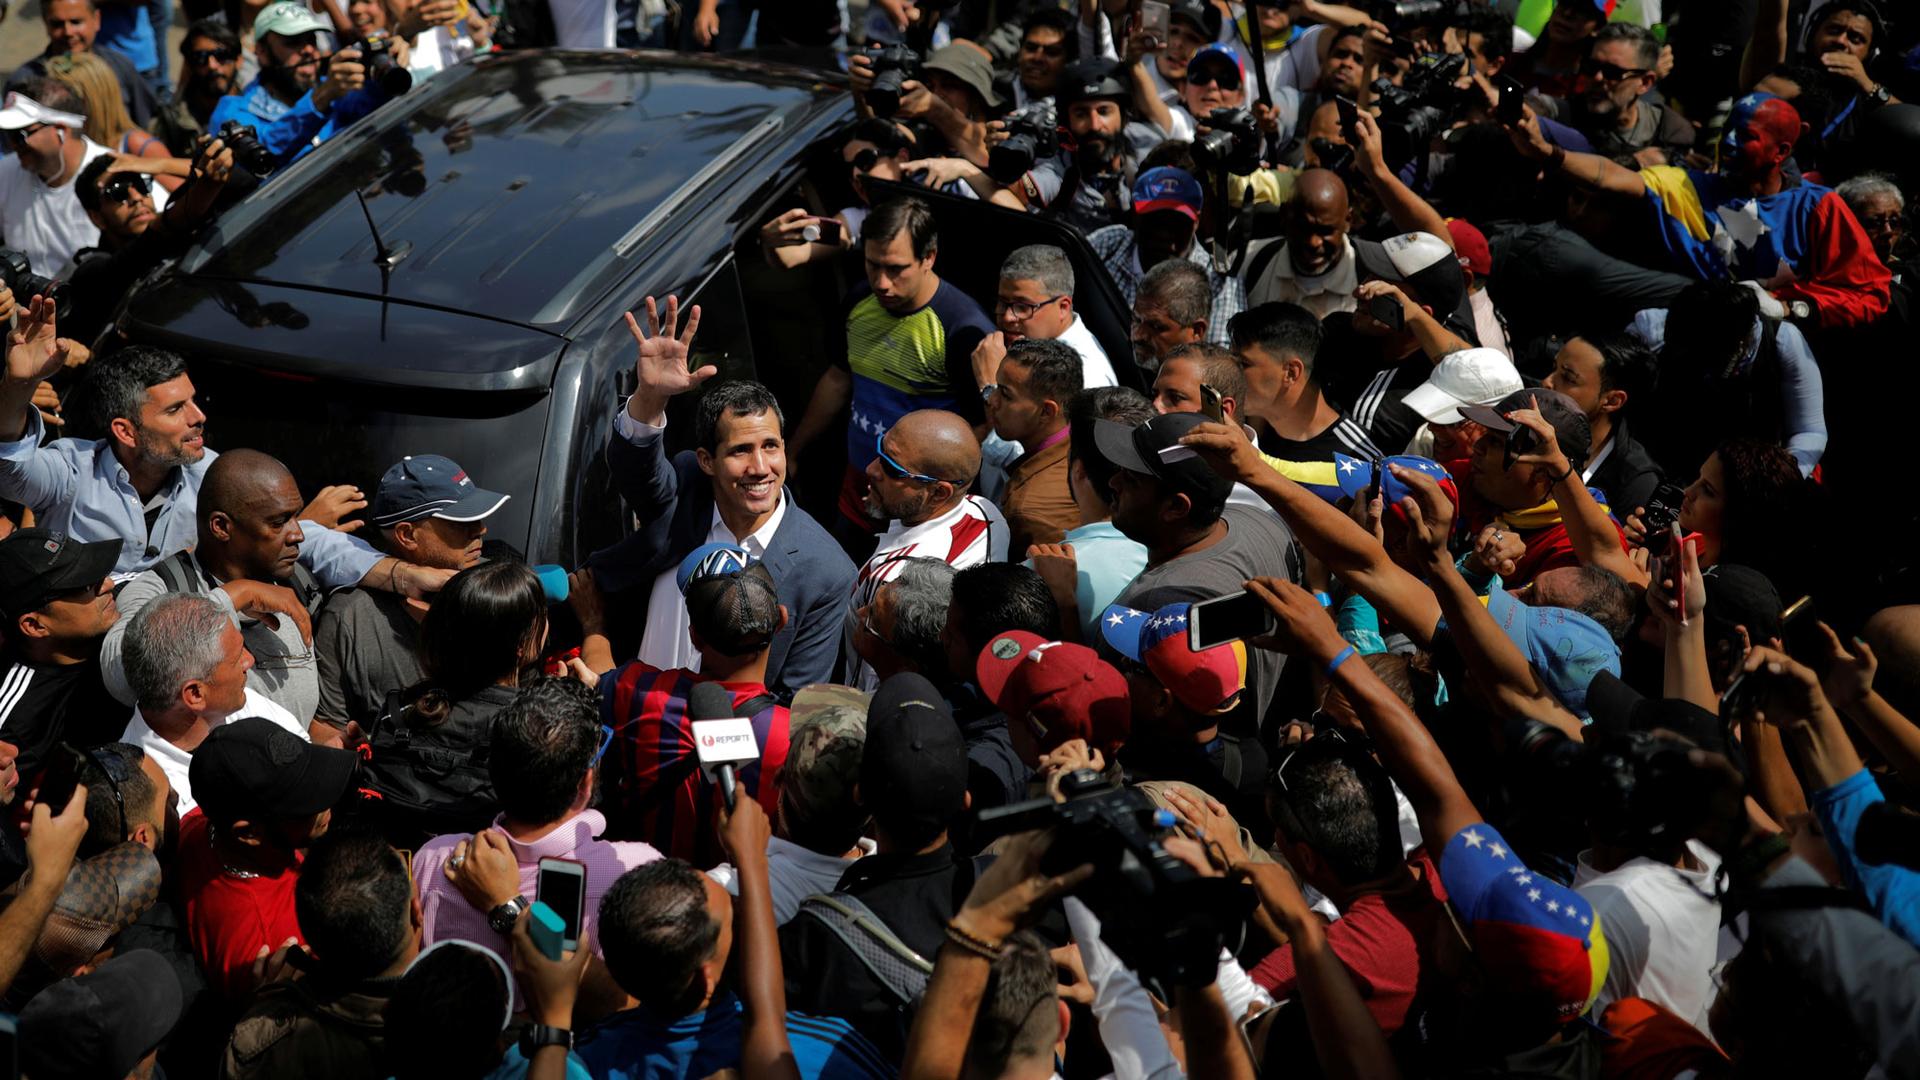 Venezuelan opposition leader Juan Guaido is shown surrounded about people on all sides next to a van. 